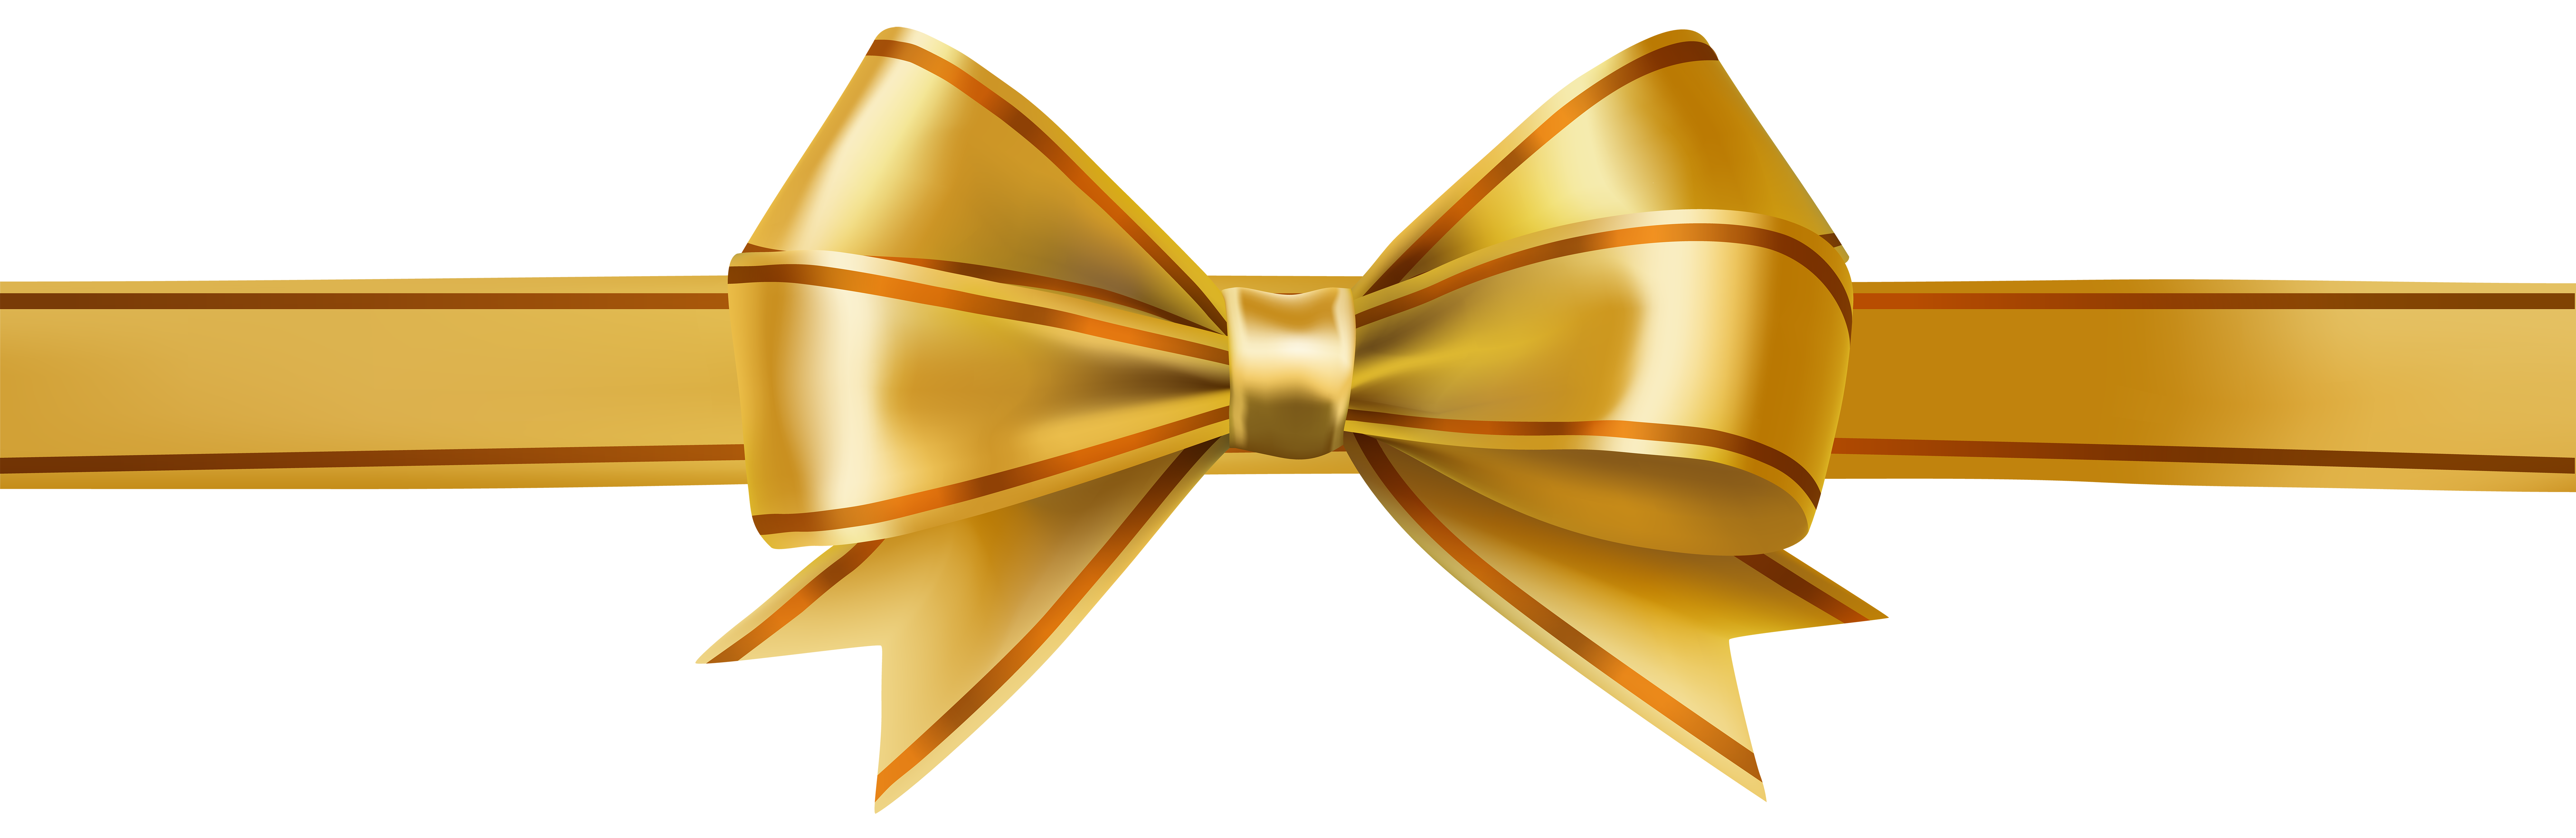 clipart bow yellow